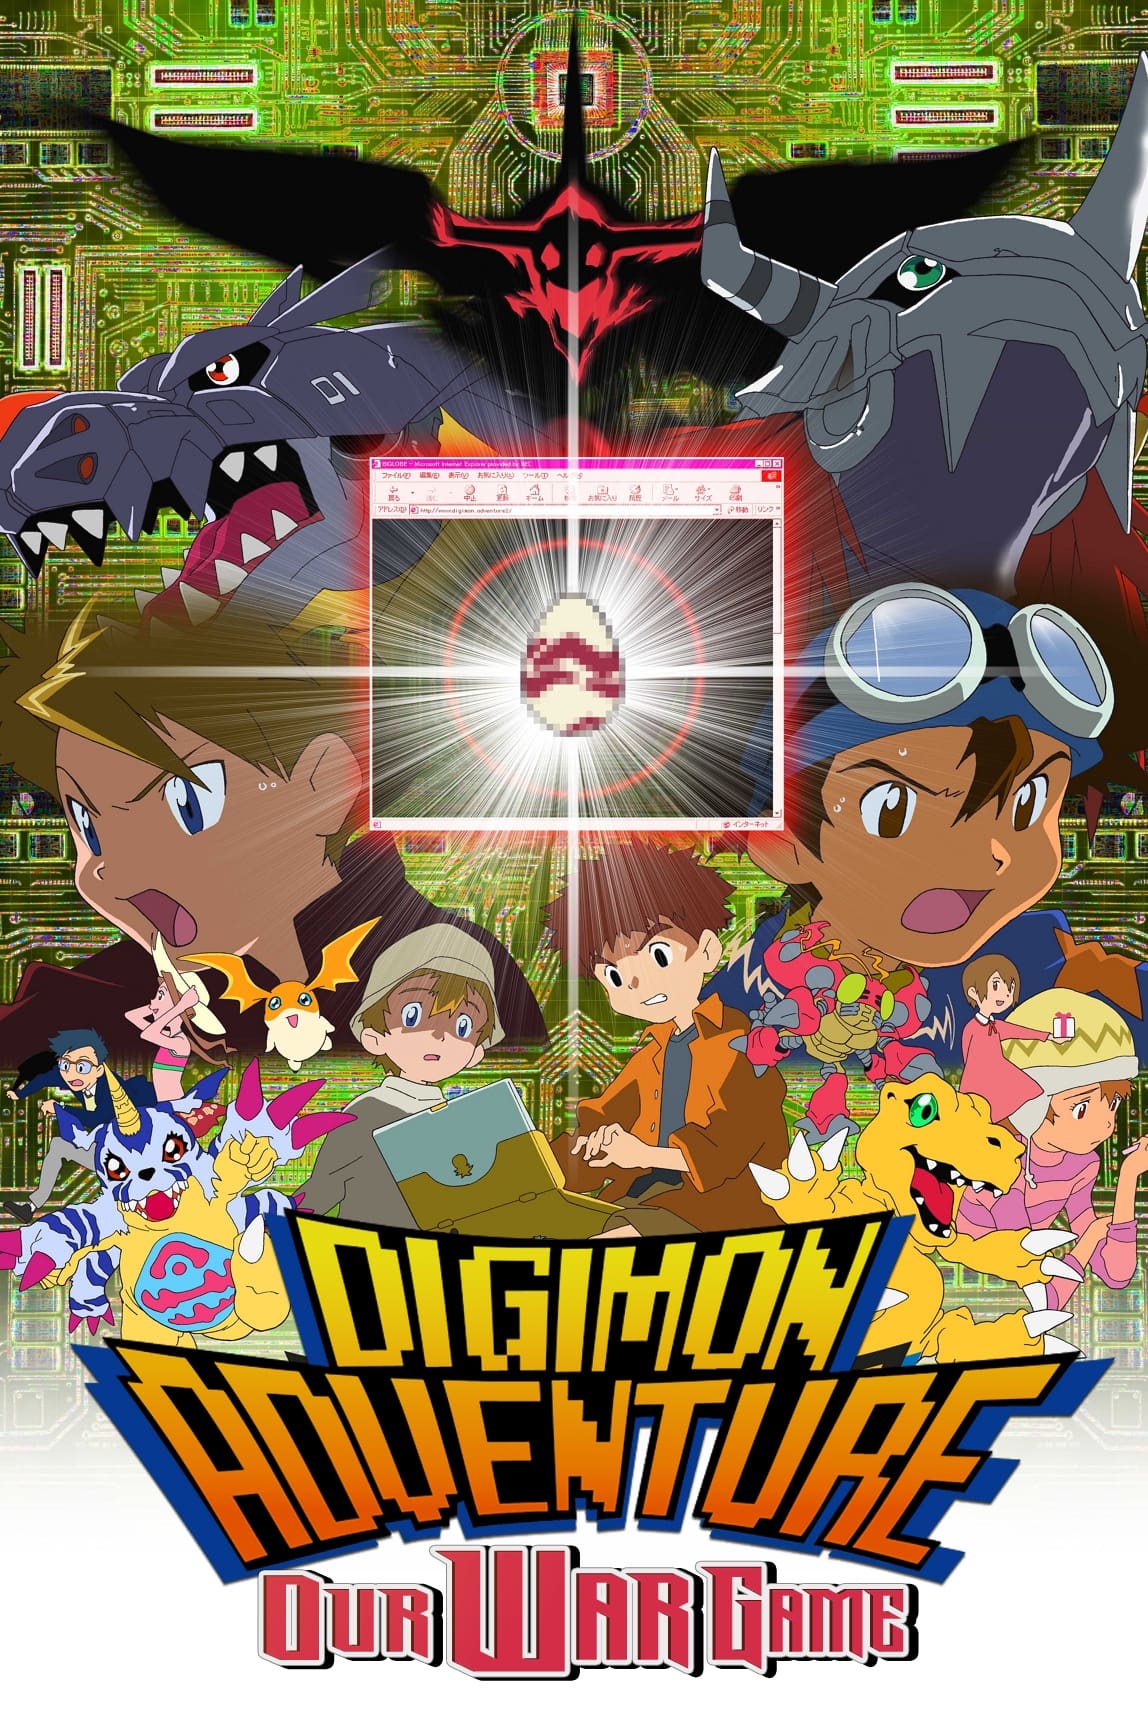 New Digimon Project Announced : r/digimon